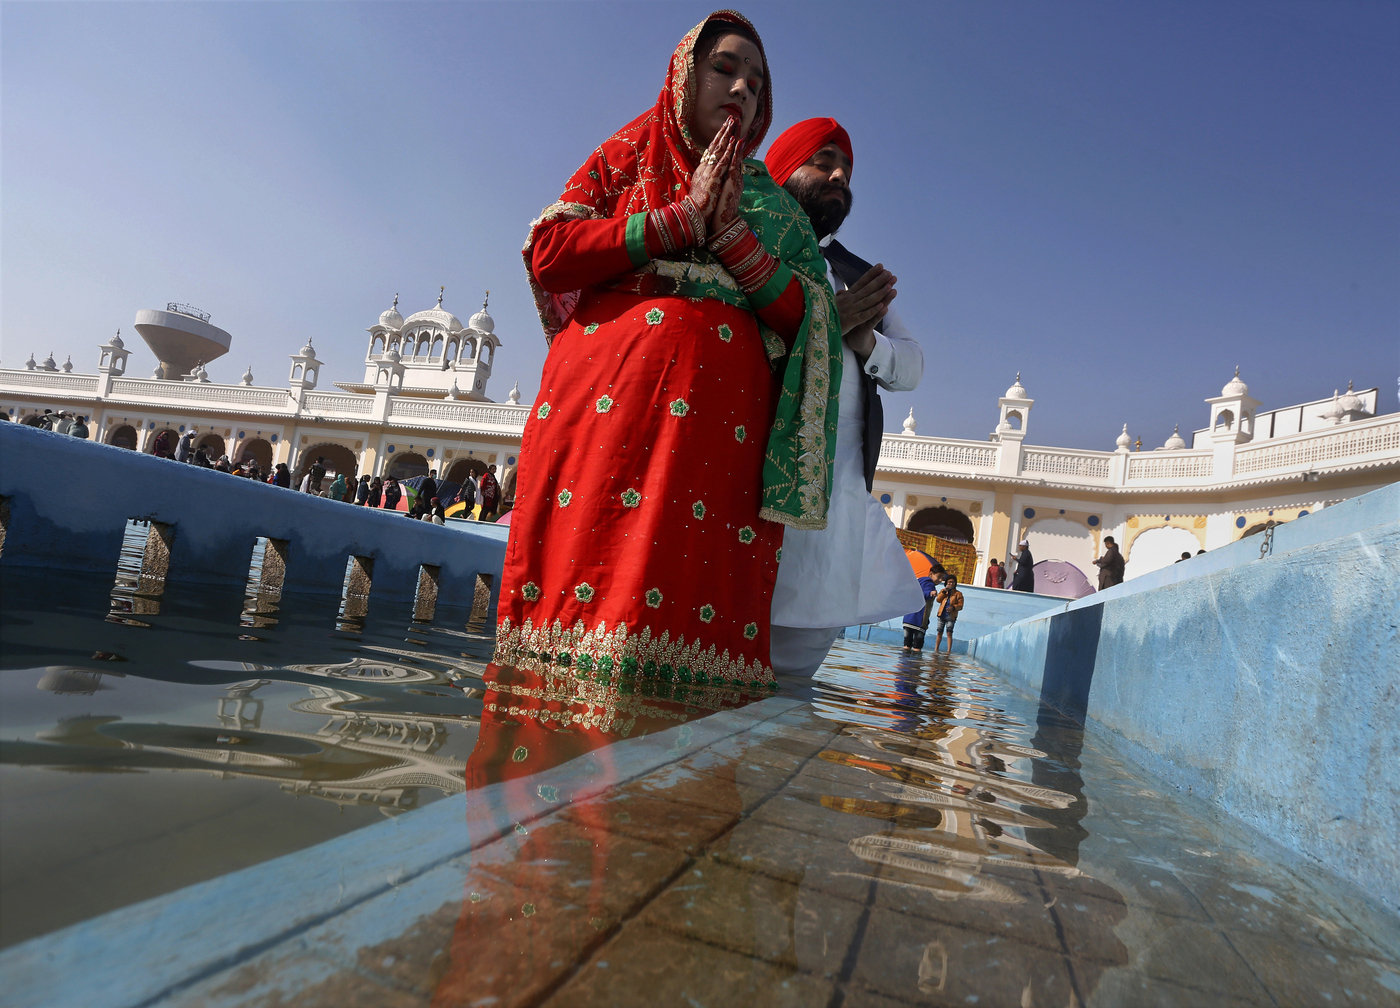 A Sikh couple perform rituals during a religious festival to celebrate the birth anniversary of their spiritual leader Baba Guru Nanak Dev, at Nankana Sahib, near Lahore, Pakistan, Monday, Nov. 30, 2020. Thousands of pilgrims from various countries arrived in Pakistan to participate in three-day festival to celebrate the 551st birth anniversary of the founder of the Sikh religion. (AP Photo/K.M. Chaudary)